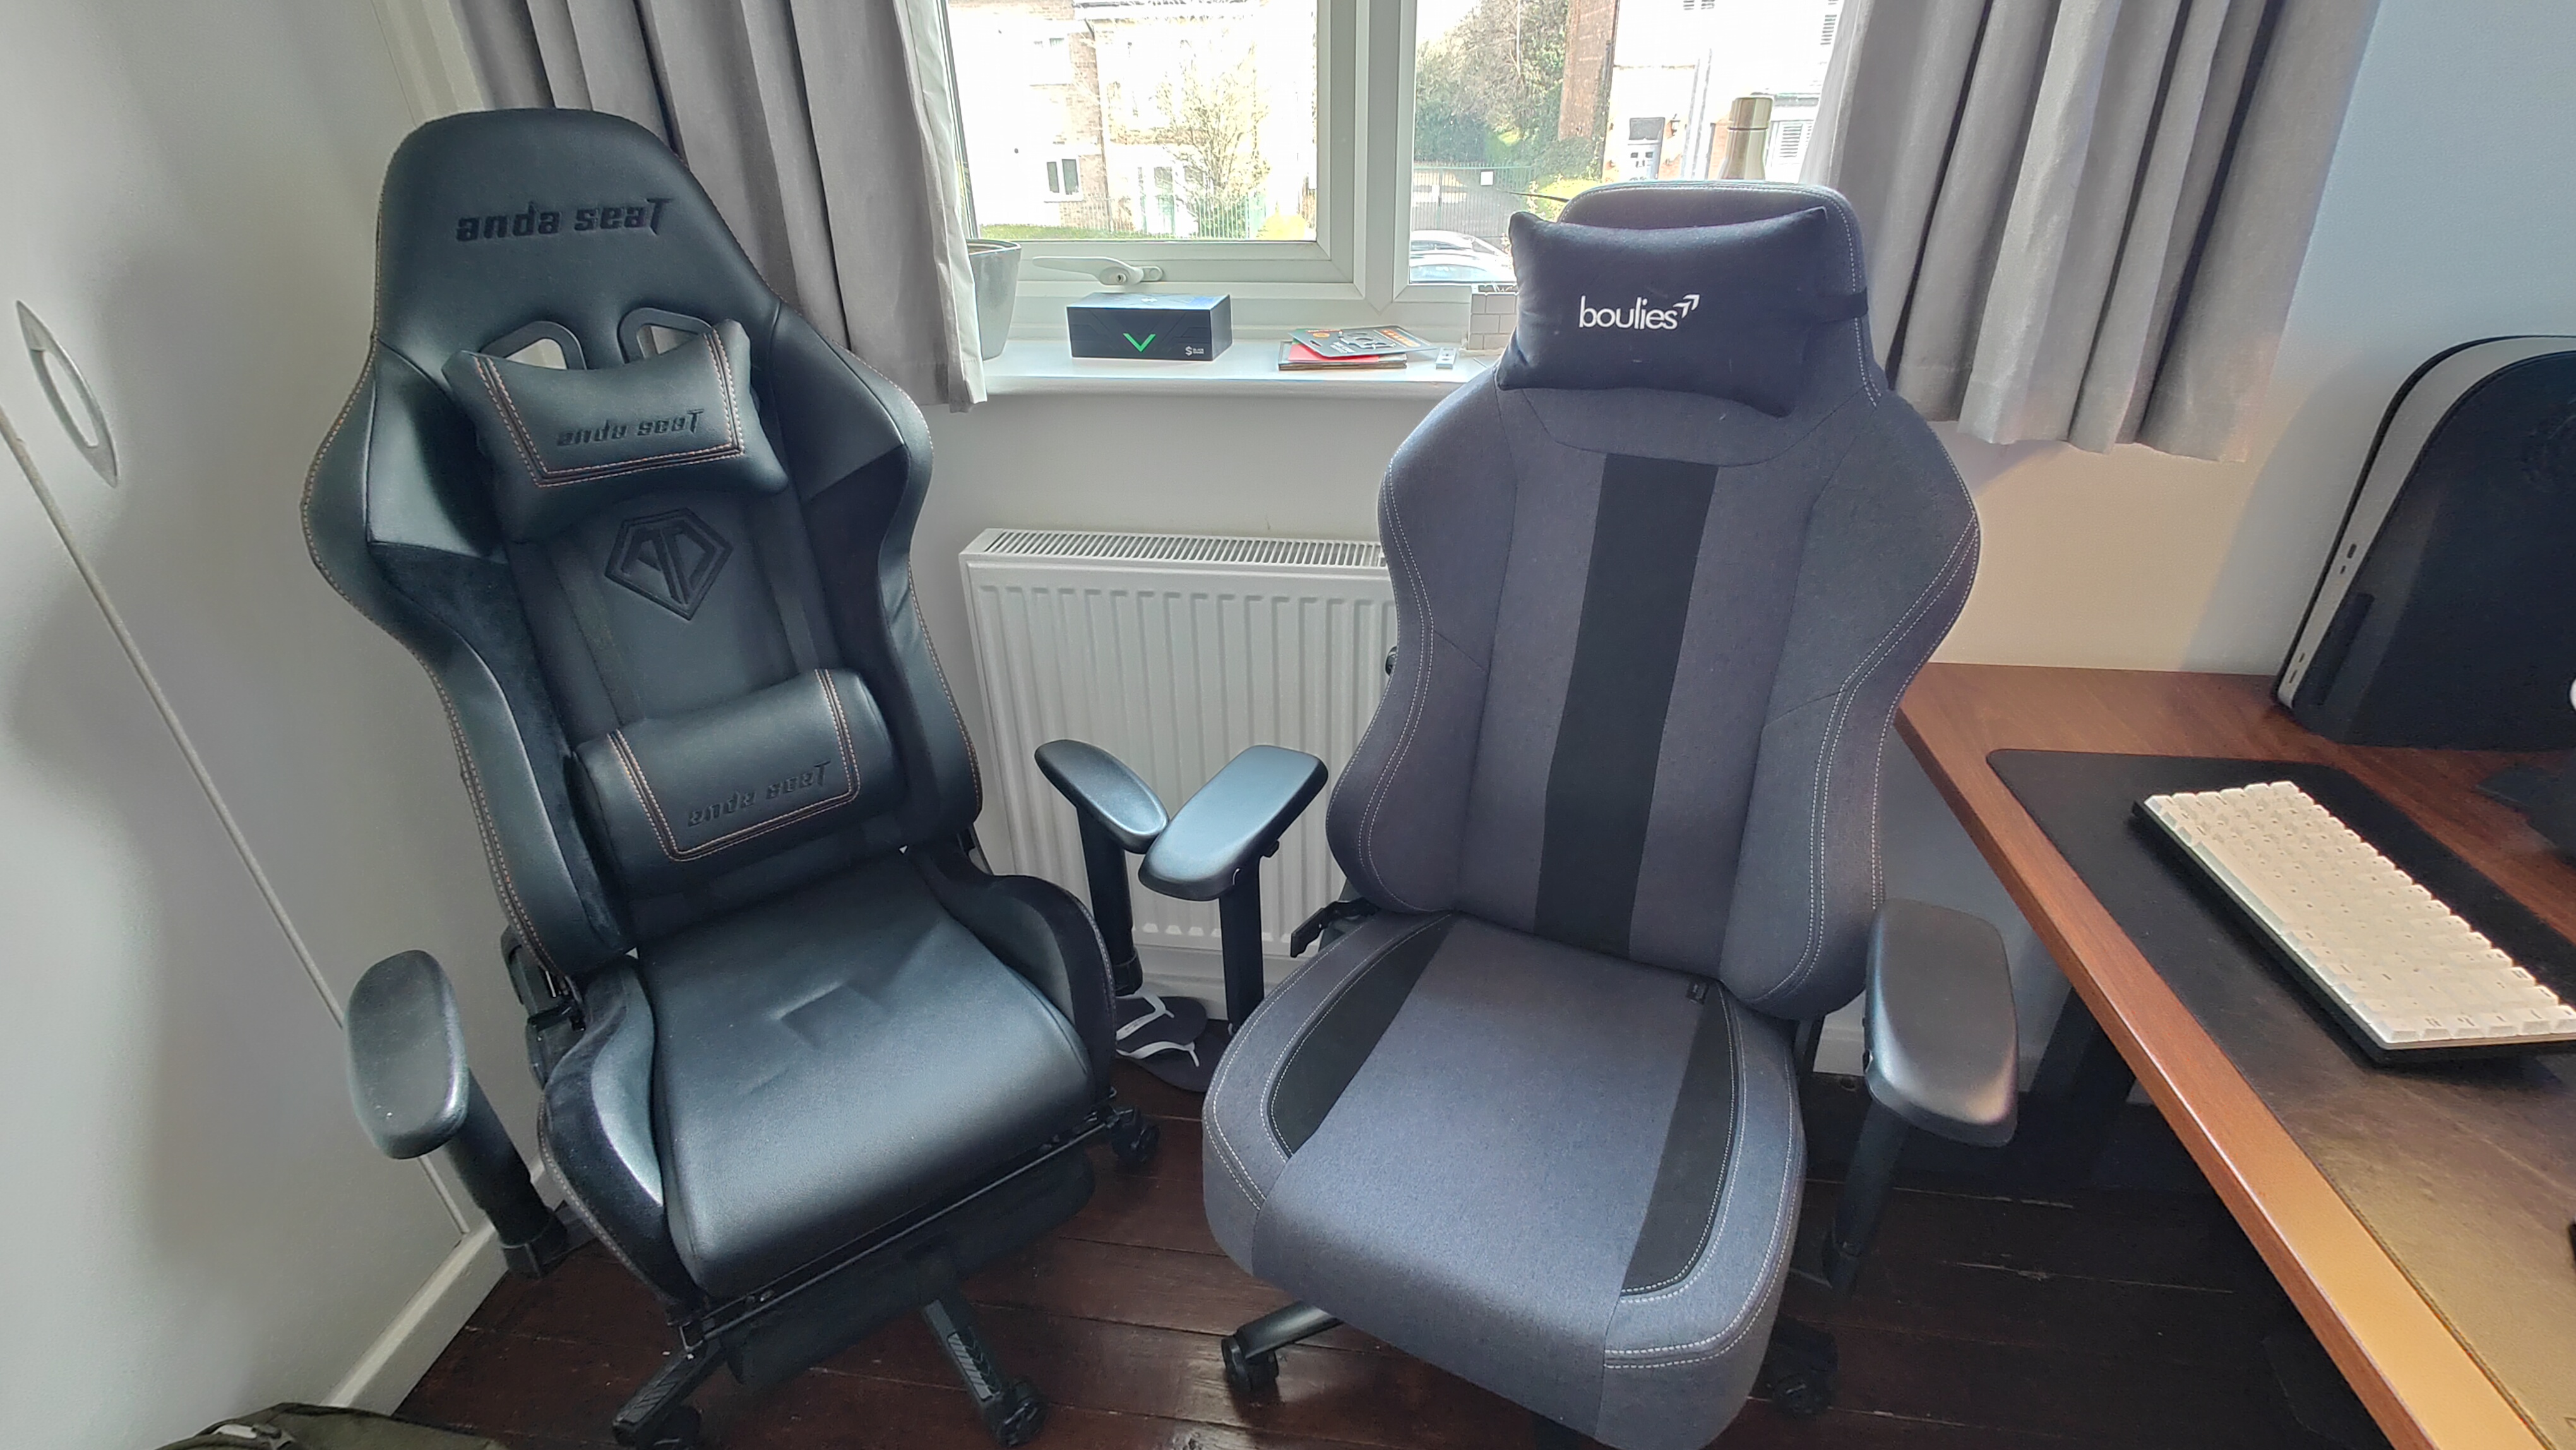 DELA DISCOUNT fuGDZwQZjoQ22mDhena4mZ Boulies Master Series Computer Chair review: The best gaming chair for short kings and queens DELA DISCOUNT  